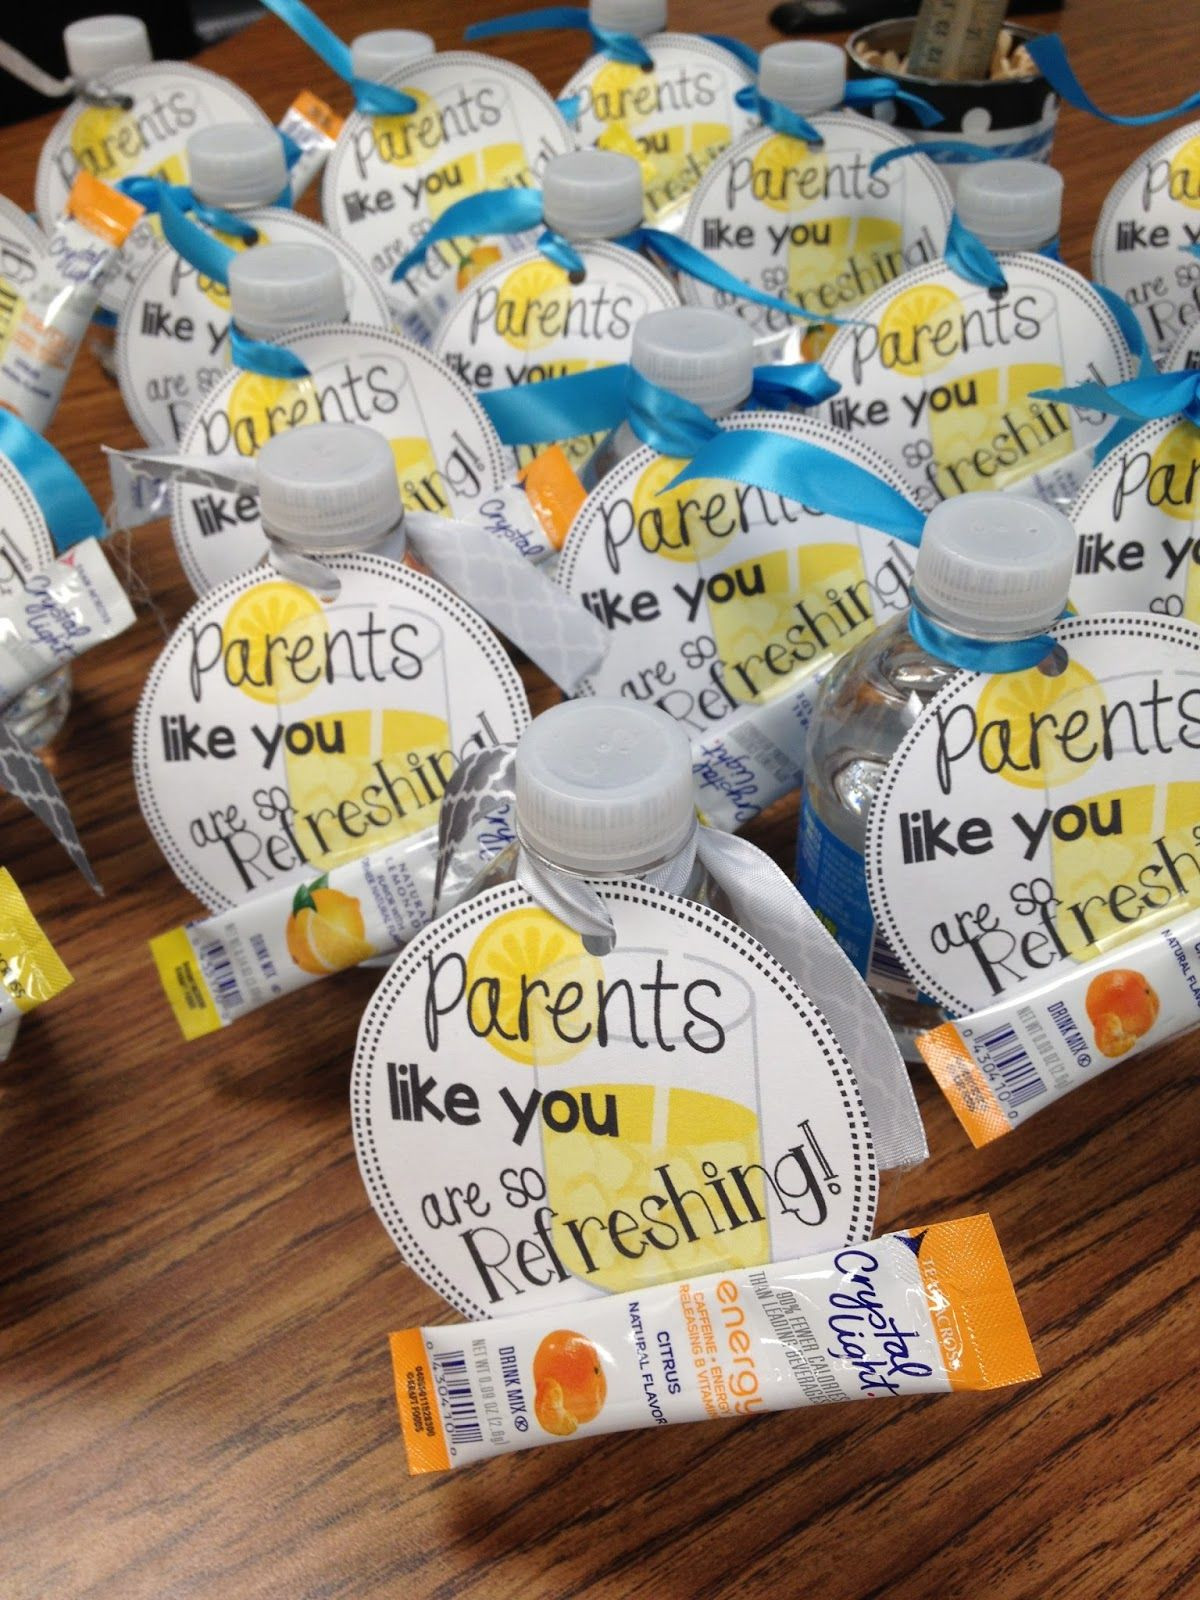 Thank You Gift Ideas For Parents
 Parent t to hand out at meet the teacher night